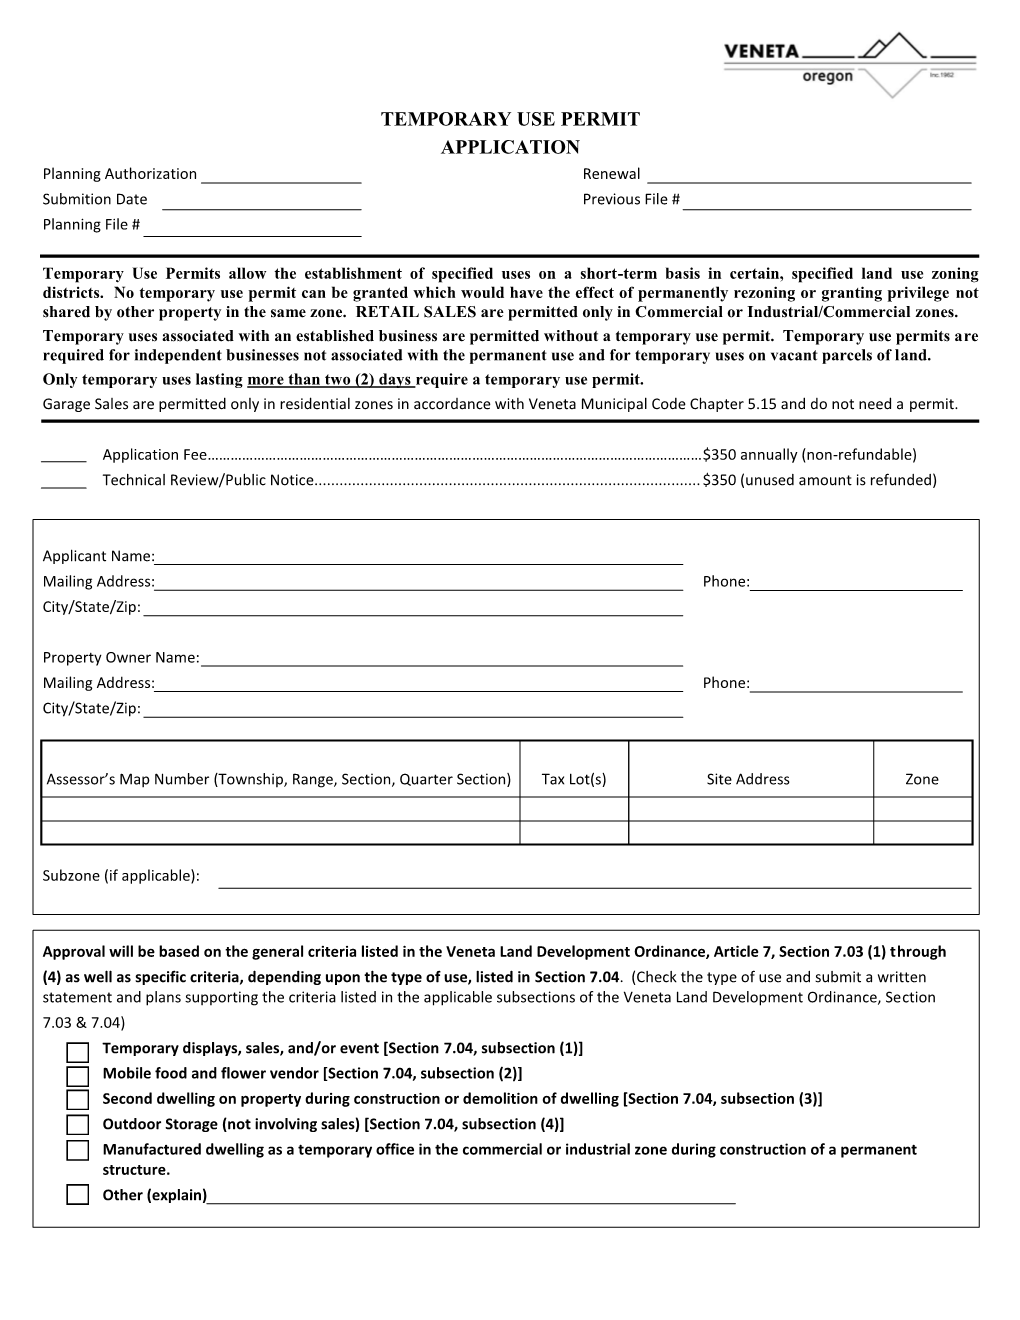 TEMPORARY USE PERMIT APPLICATION Planning Authorization Renewal Submition Date Previous File # Planning File